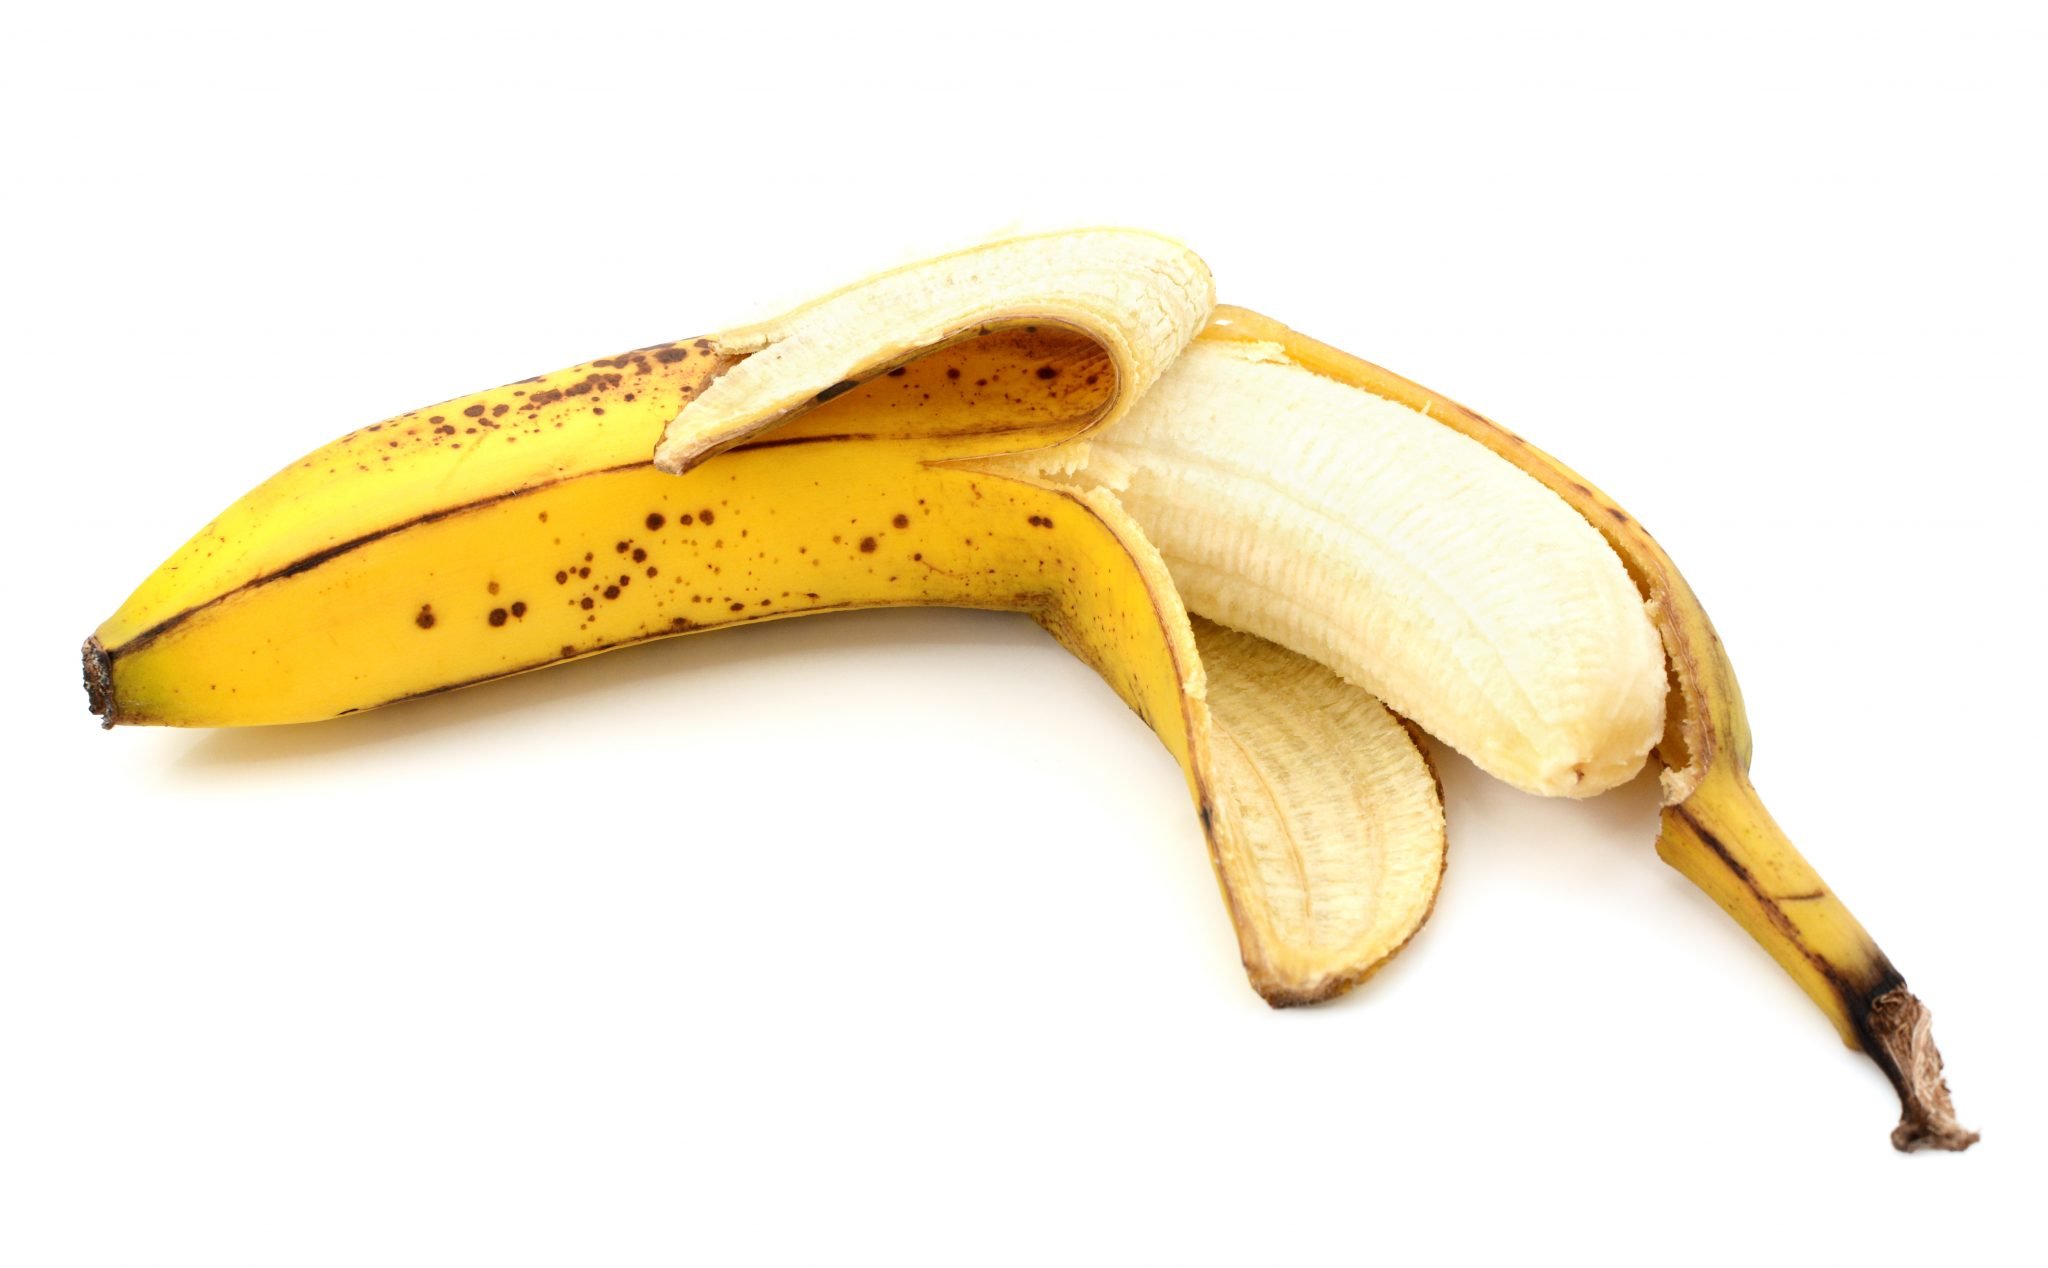 Are Bananas Allowed on the GAPS and SCD Diets?